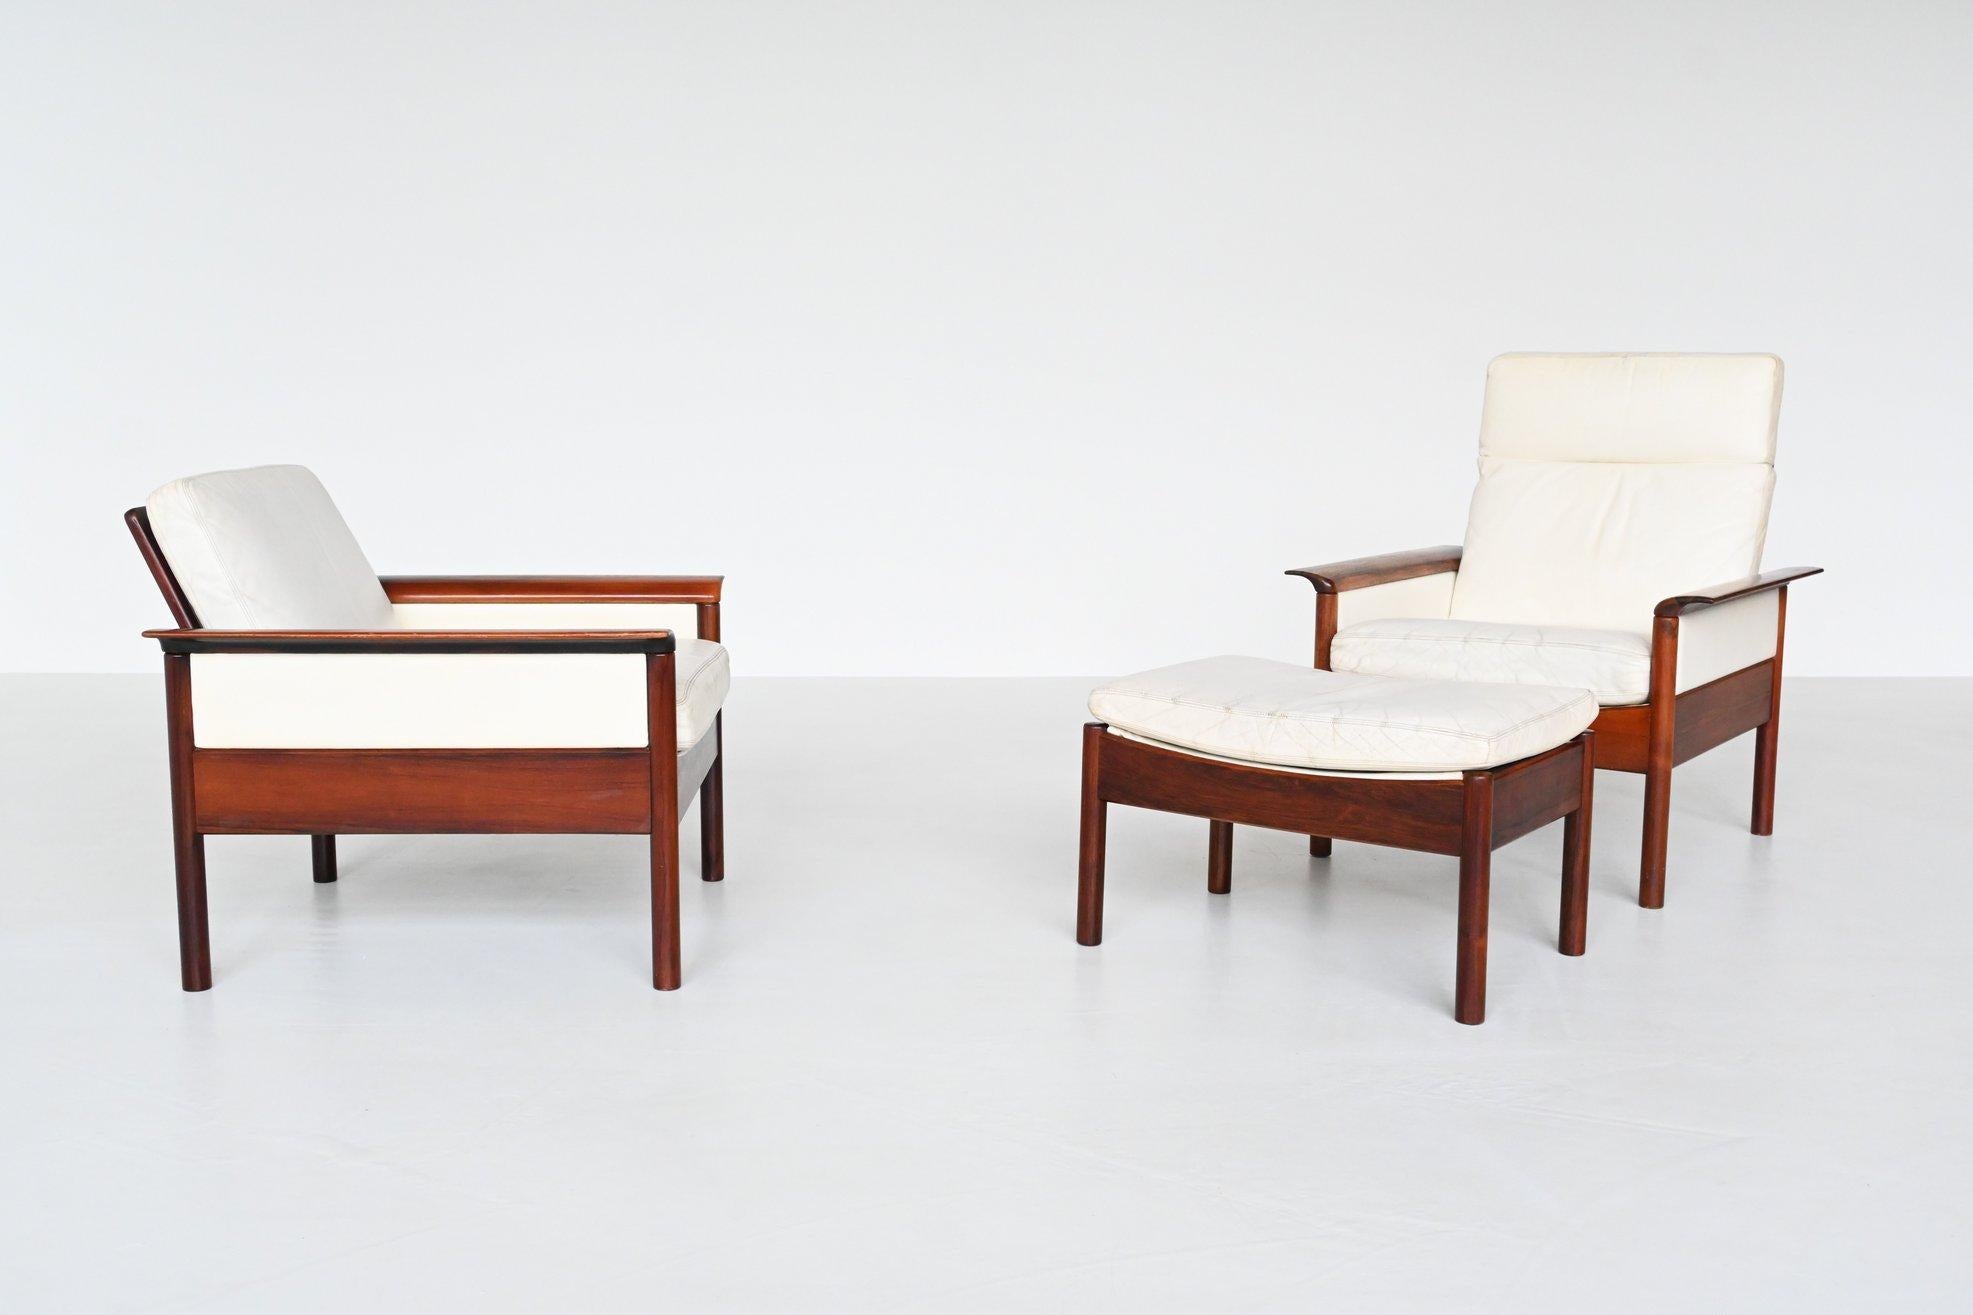 Beautiful pair of lounge chairs designed by Hans Olsen for Vatne Mobler, Denmark 1960. These chairs and ottoman have nicely grained solid rosewood frames and white leather cushions. They are nice shaped with rolled winged arms. The chairs are in